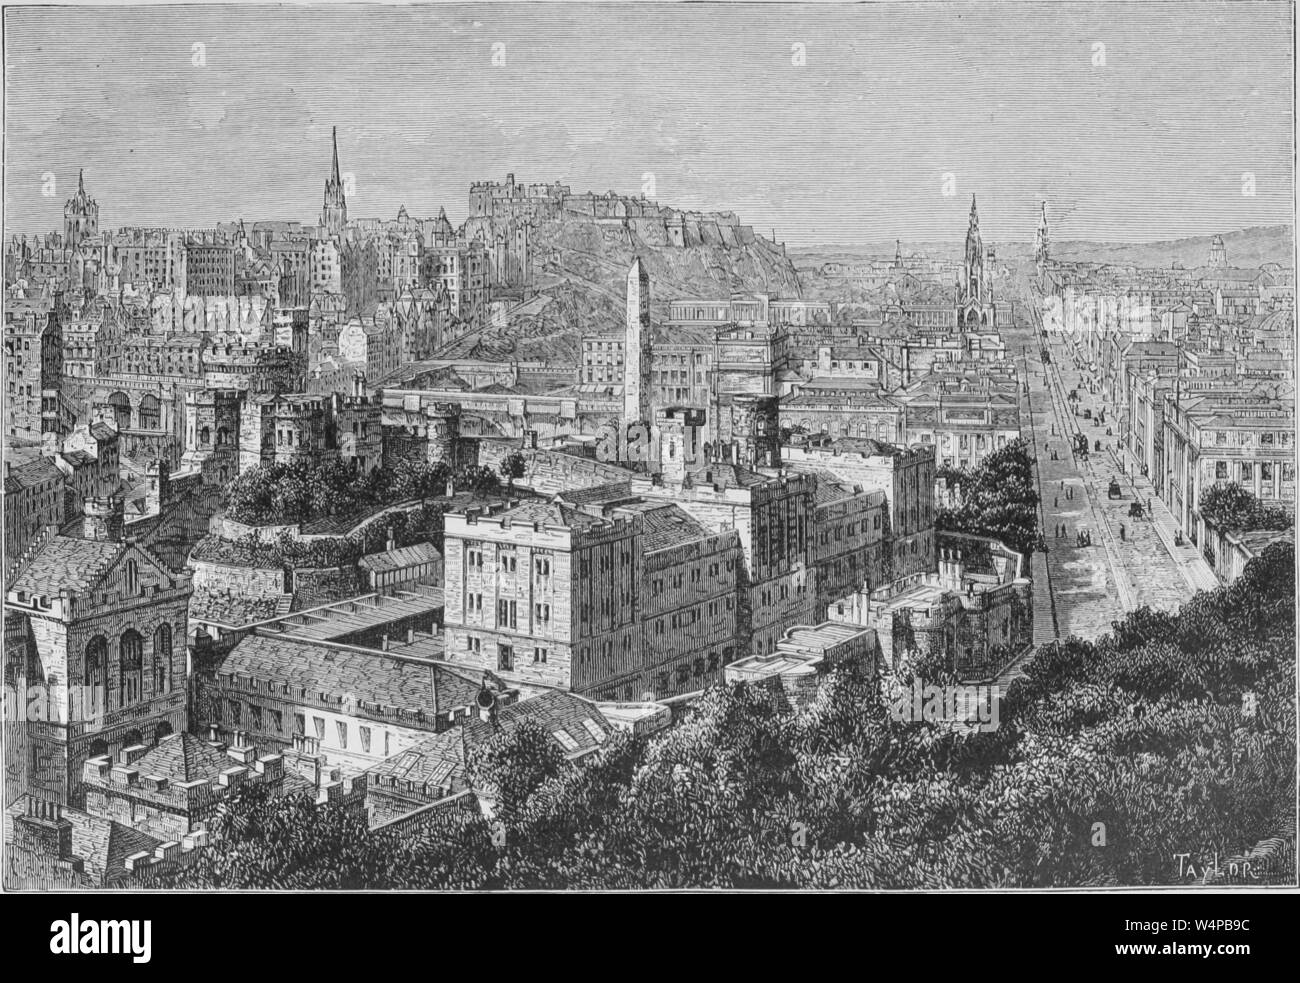 Engraving of the Edinburgh viewed from Calton Hill, Scotland, from the book 'The earth and its inhabitants' by Elisee Reclus, 1881. Courtesy Internet Archive. () Stock Photo